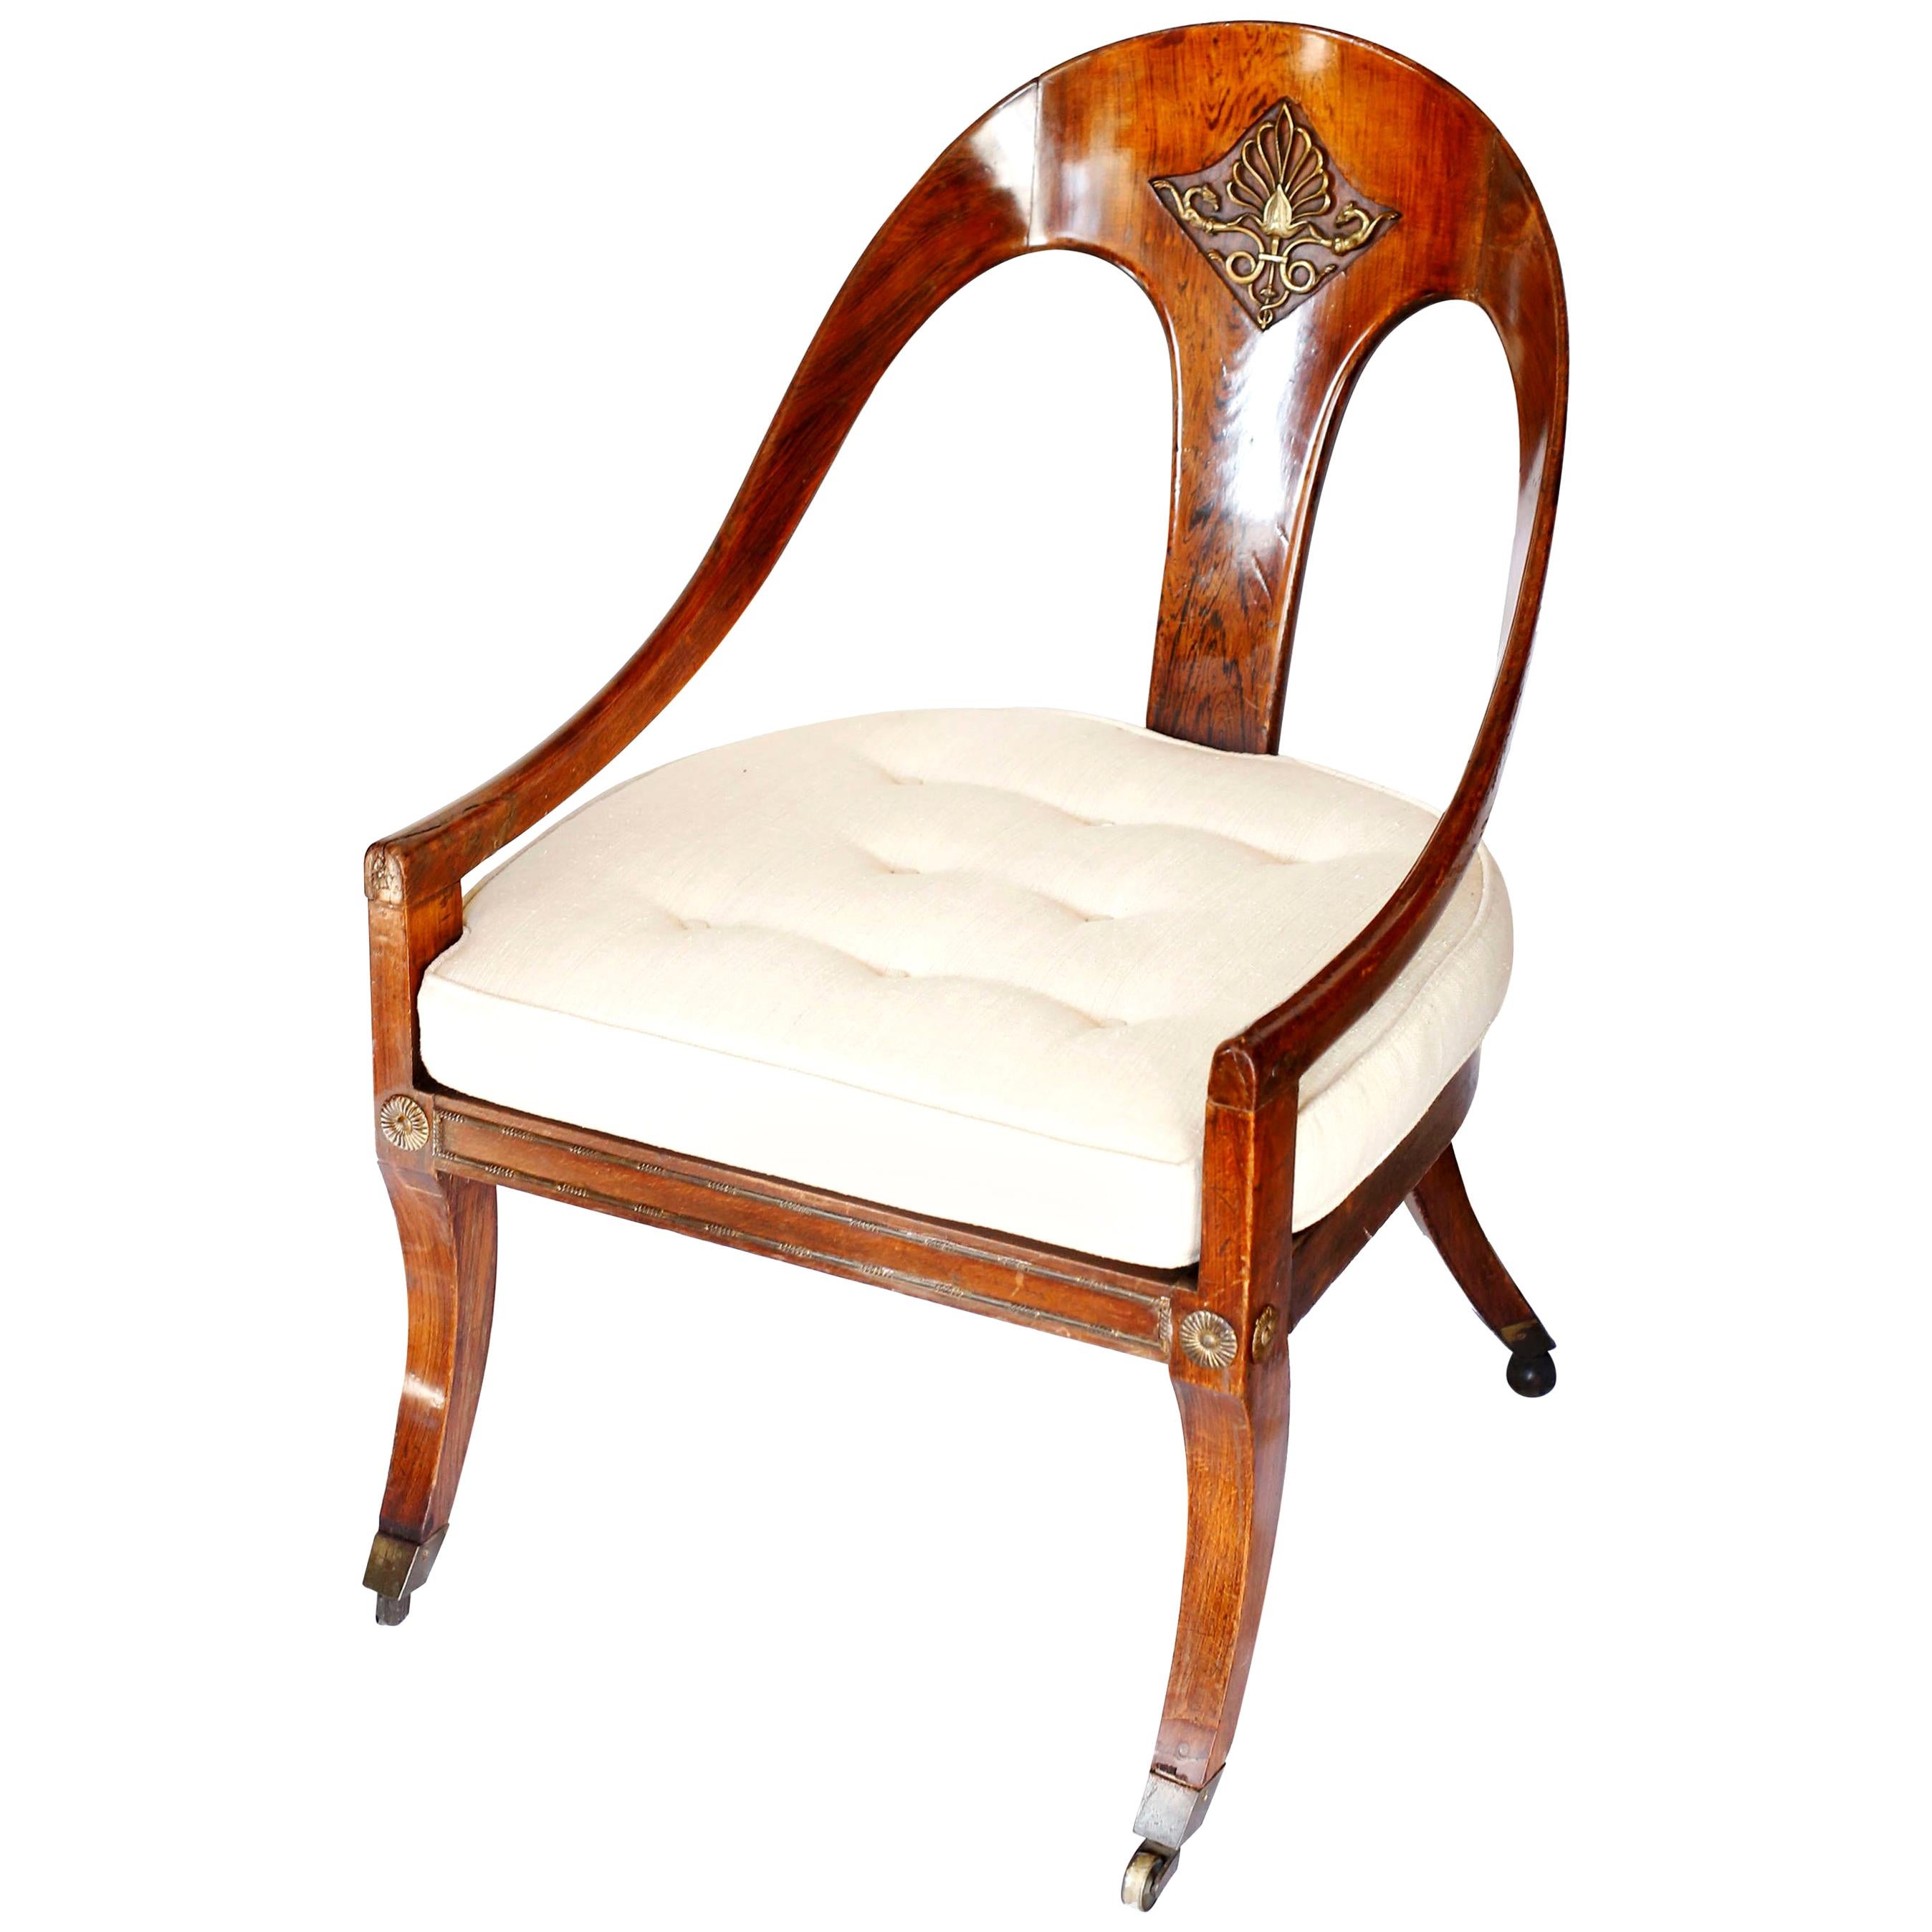 Early 19th Century Regency Faux Rosewood Roman Spoon Chair For Sale